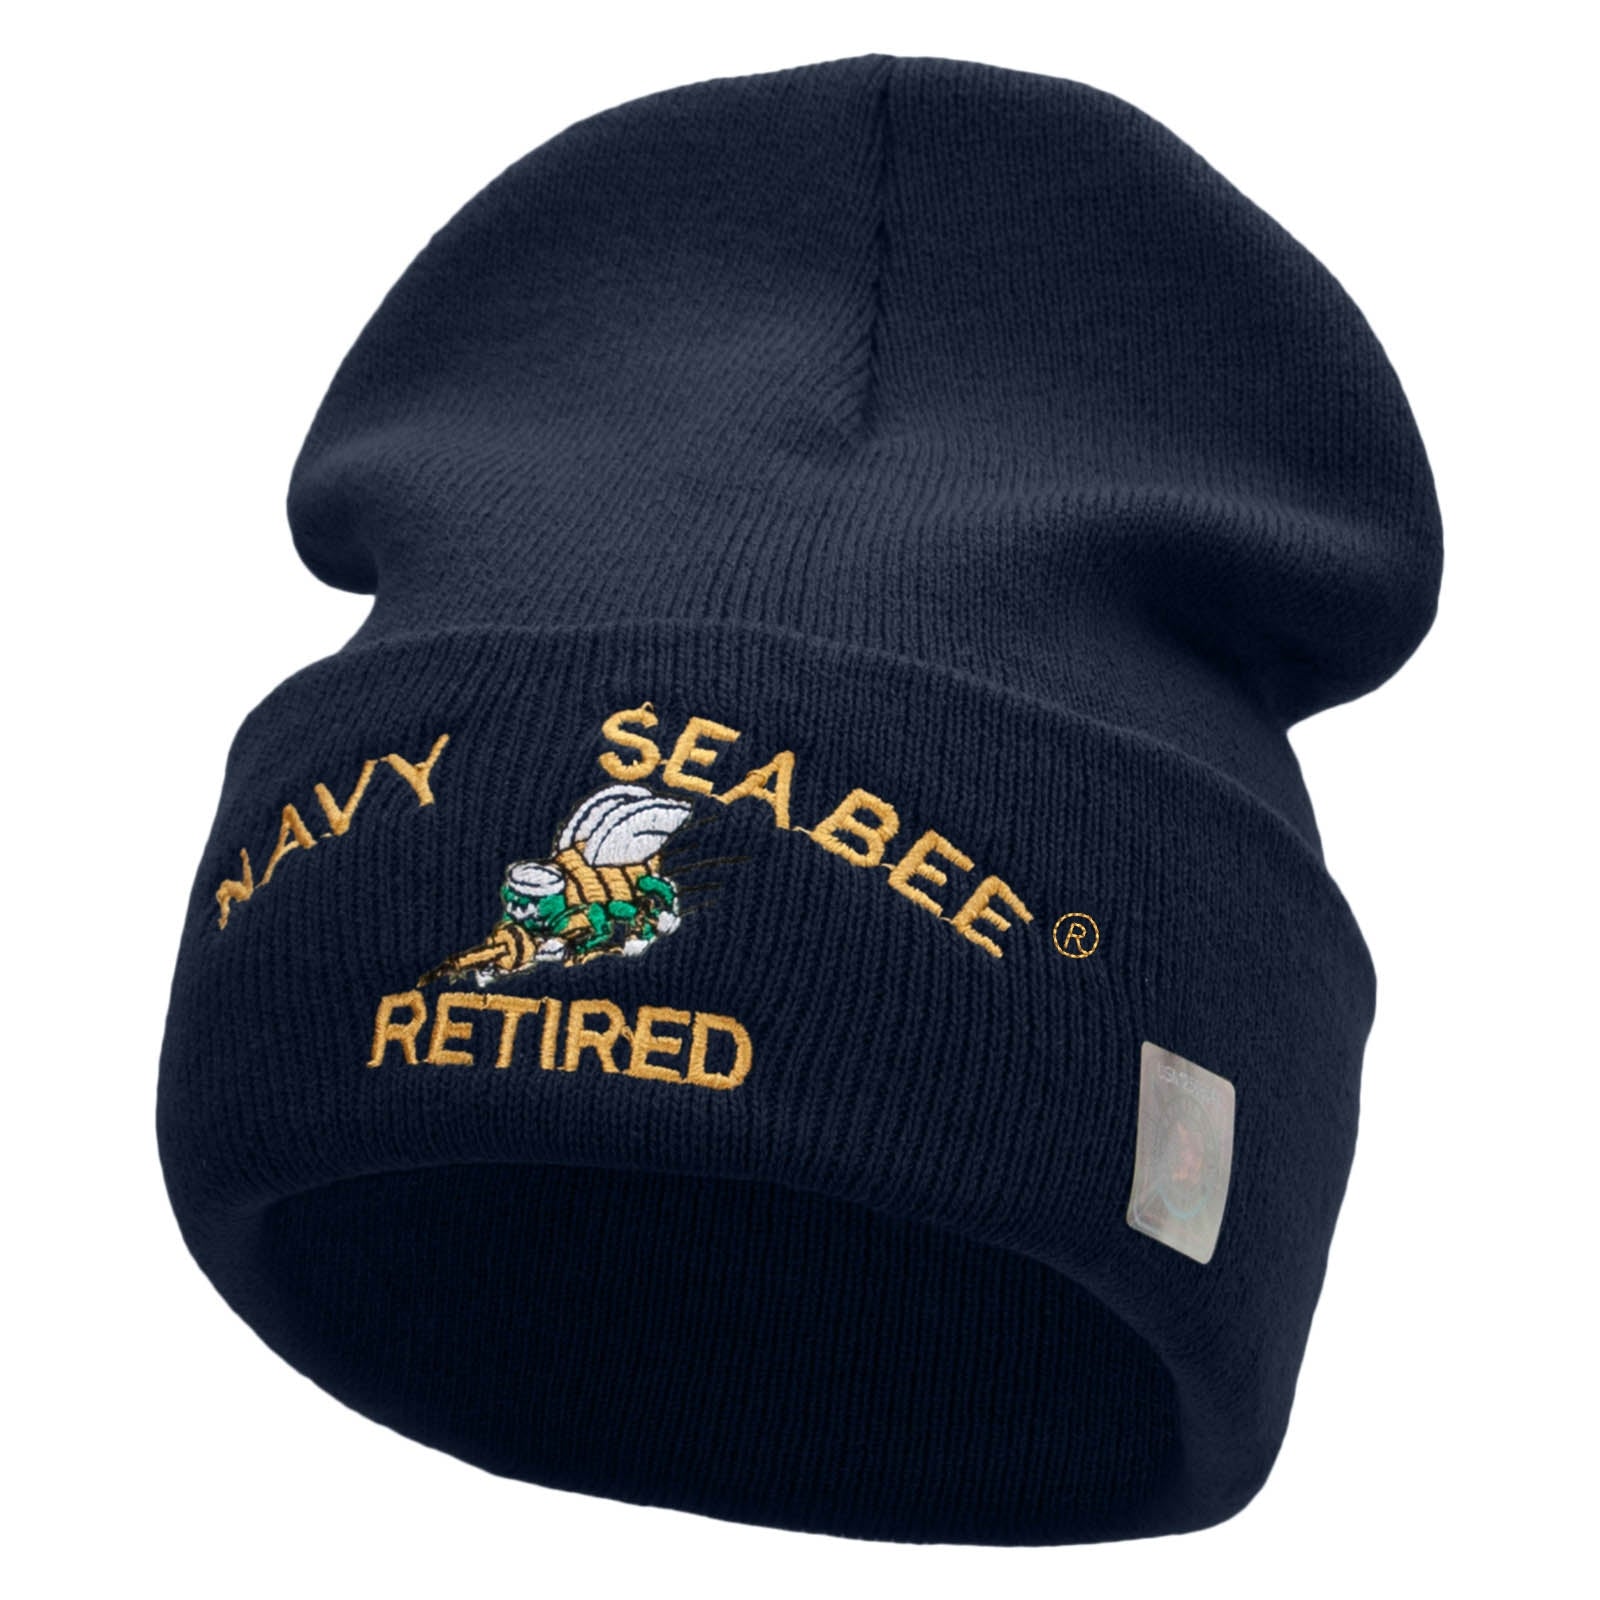 Licensed Navy Seabee Retired Logo Embroidered Long Beanie Made in USA - Navy OSFM